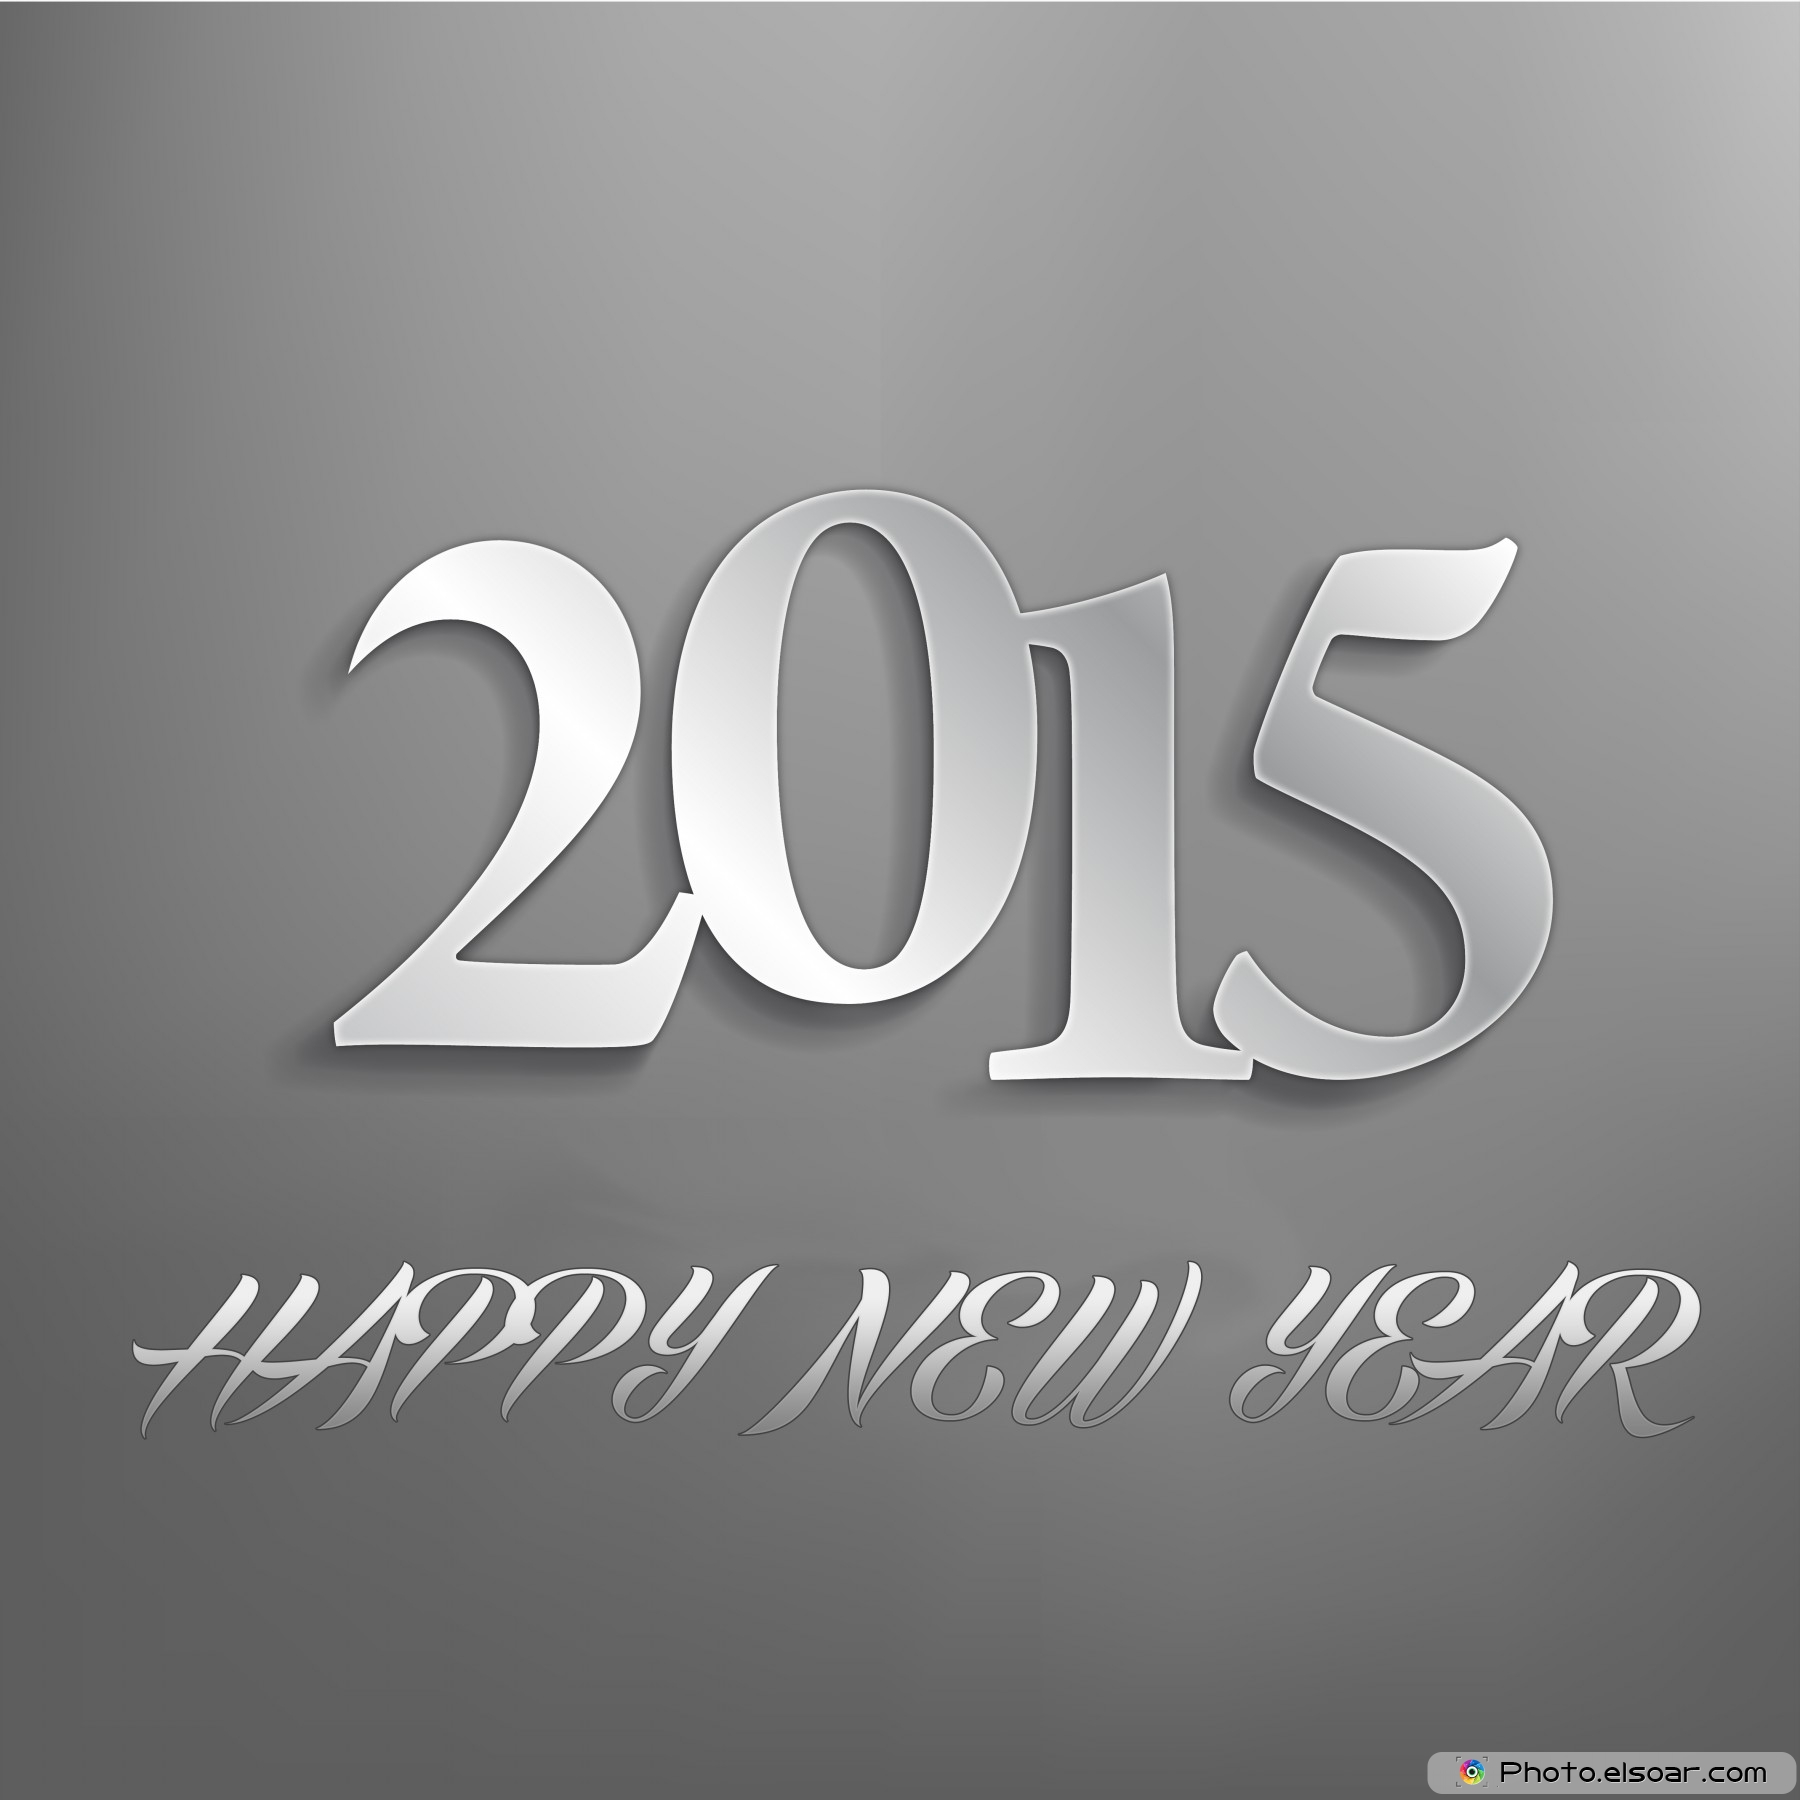 Happy New Year Various Designs Elsoar